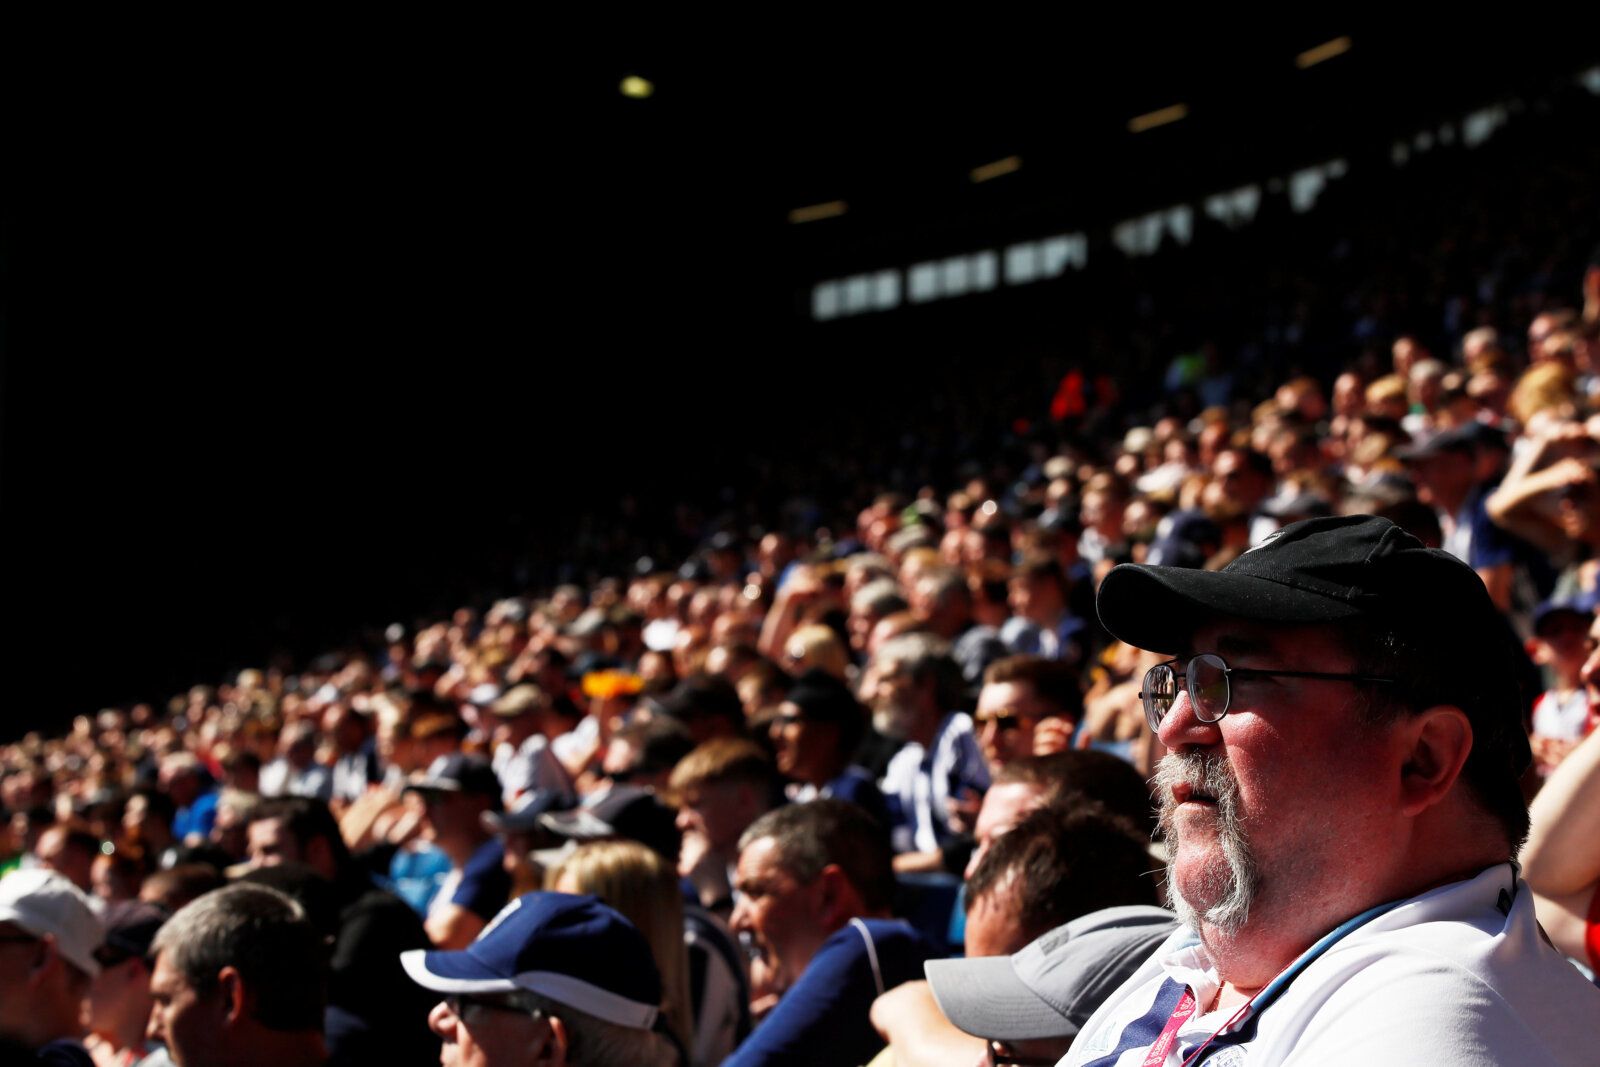 Soccer Football - Premier League - West Bromwich Albion vs Tottenham Hotspur - The Hawthorns, West Bromwich, Britain - May 5, 2018   West Brom fans      Action Images via Reuters/Jason Cairnduff    EDITORIAL USE ONLY. No use with unauthorized audio, video, data, fixture lists, club/league logos or 